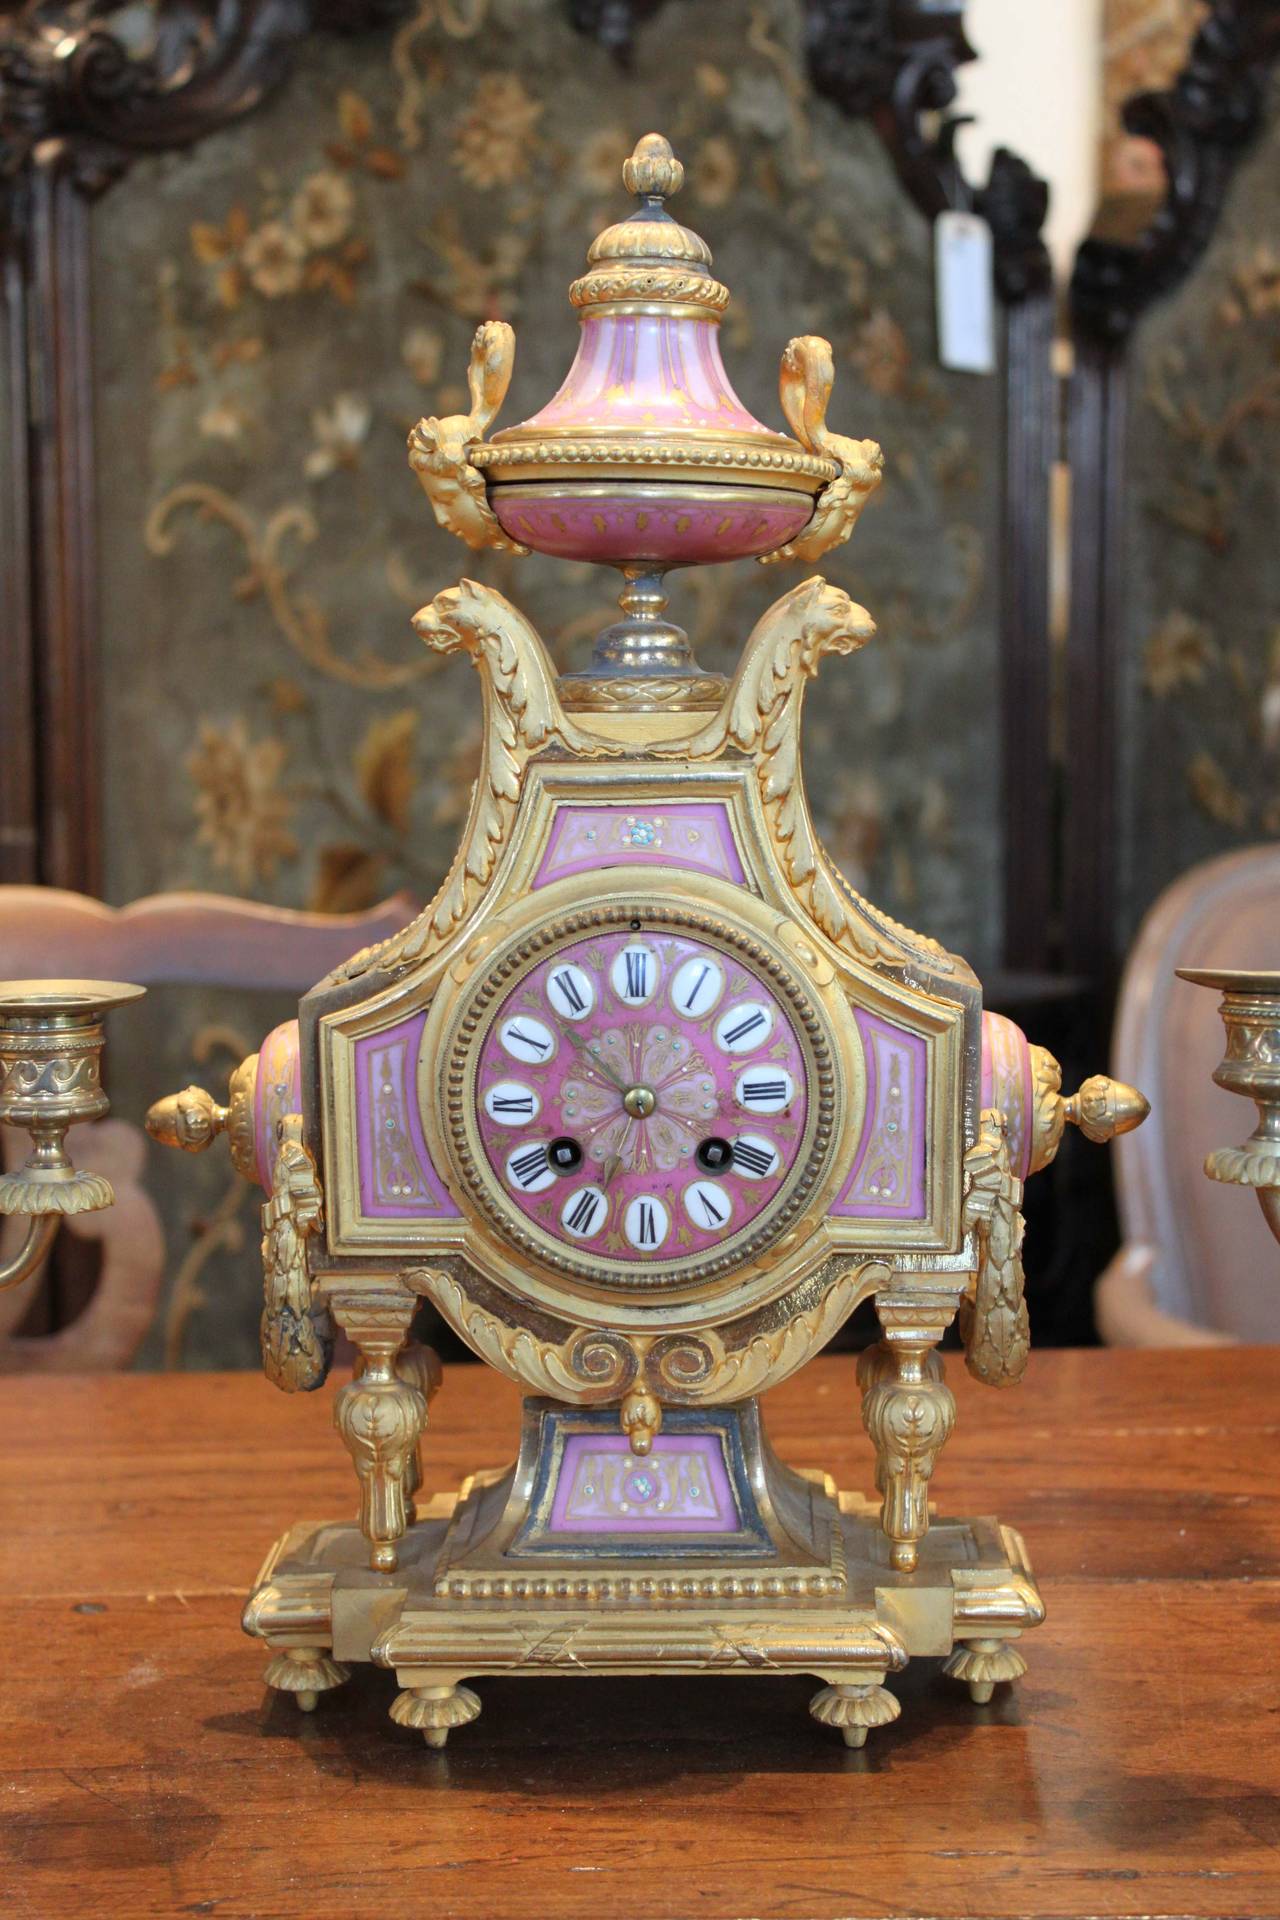 A 19th century French gilt ormolu clock accompanied by a pair of candelabra with pink sèvres plaques. 

Clock: 16